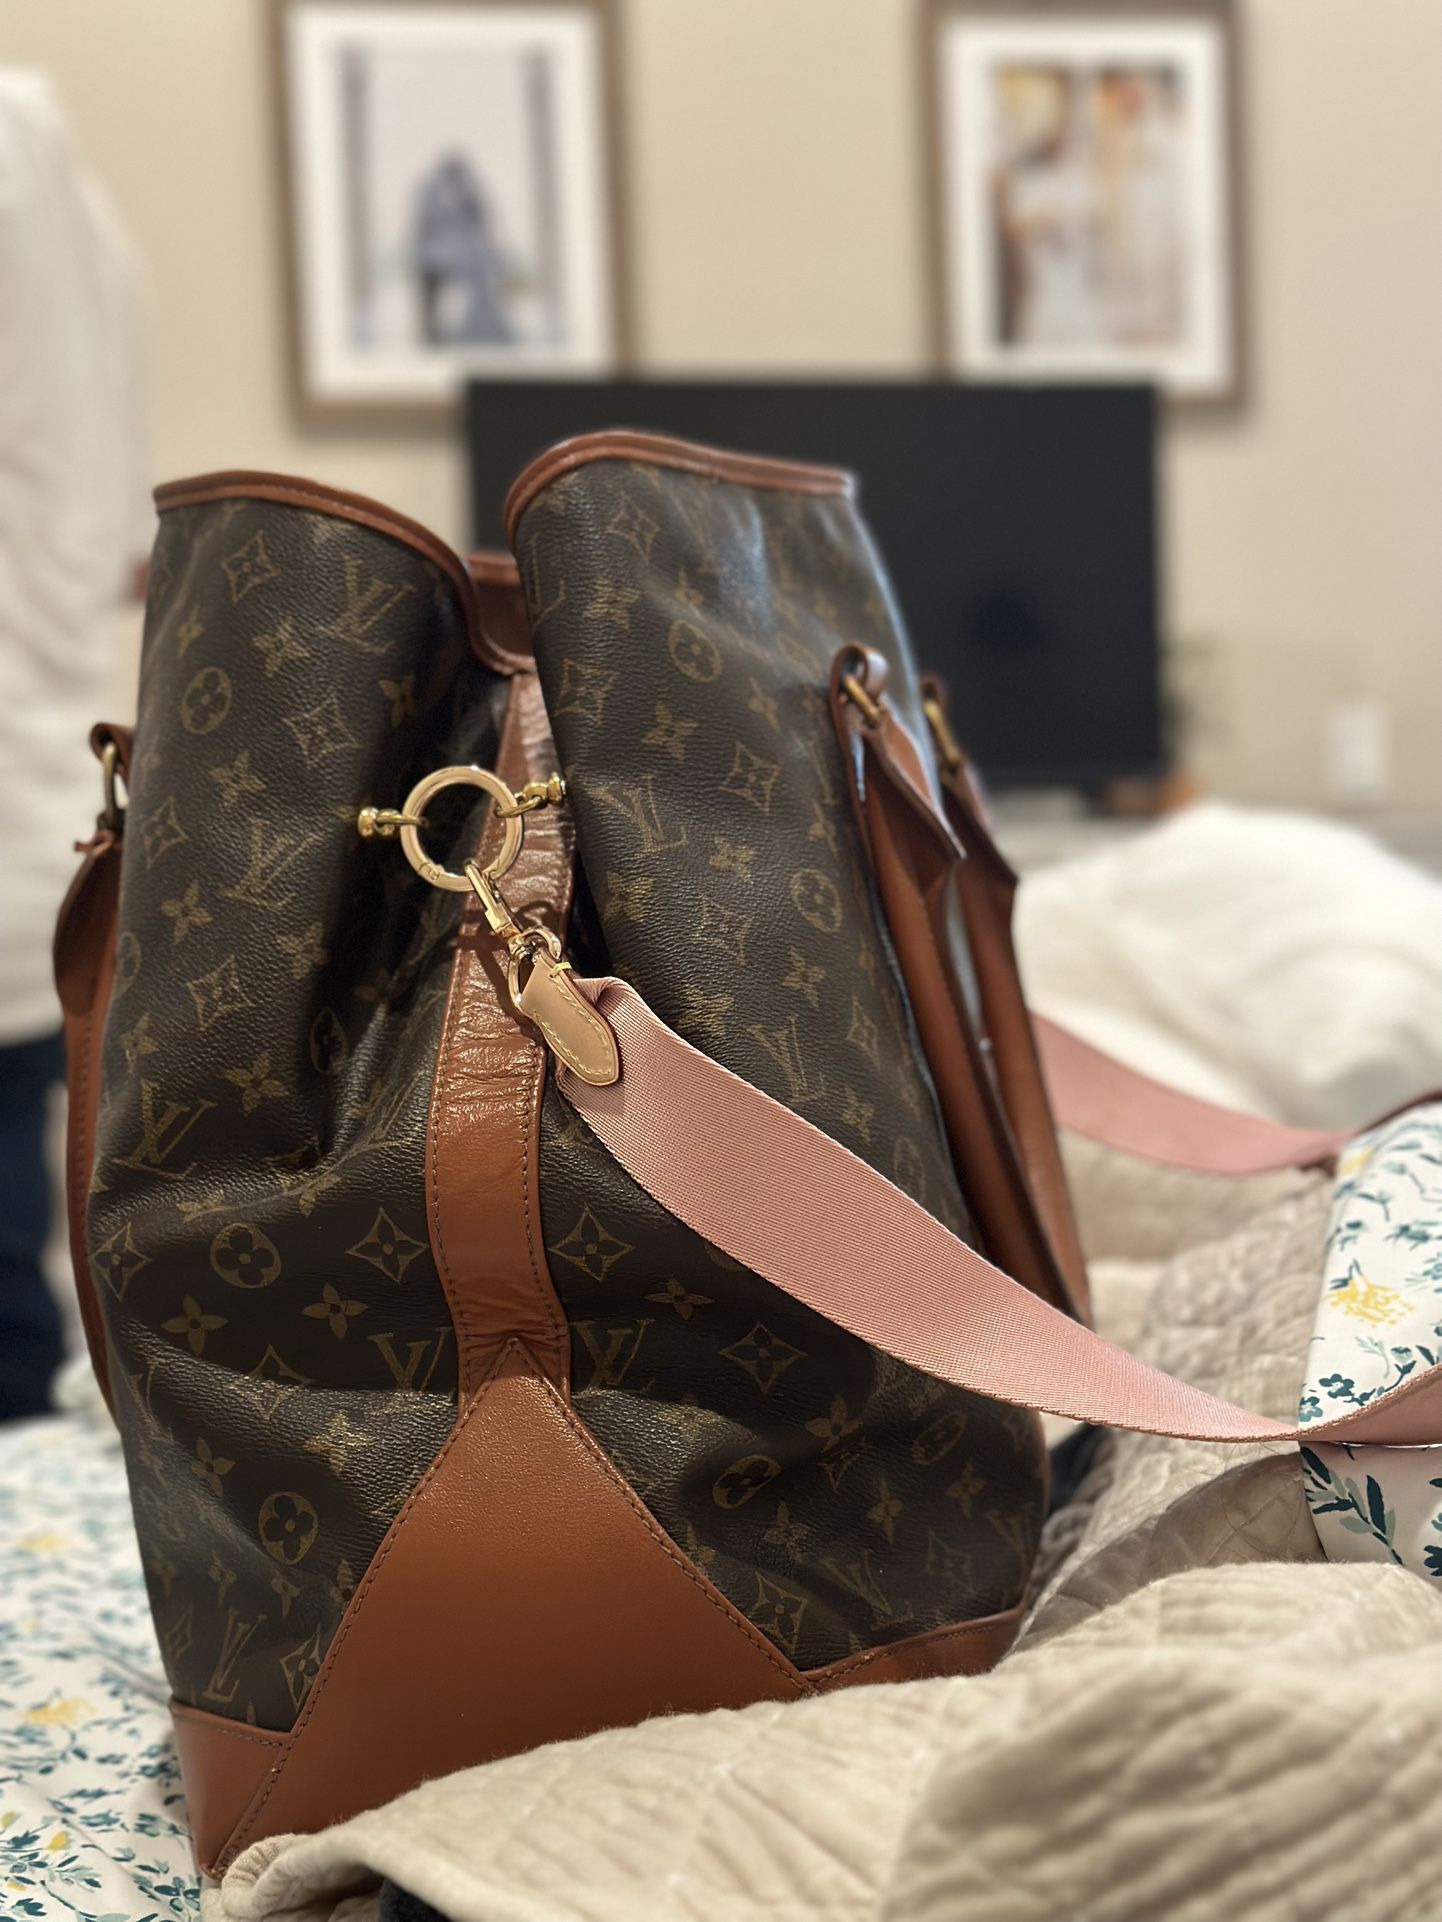 Authentic Louis Vuitton Gift Box w Shopping Bag for Sale in Diamond Bar, CA  - OfferUp